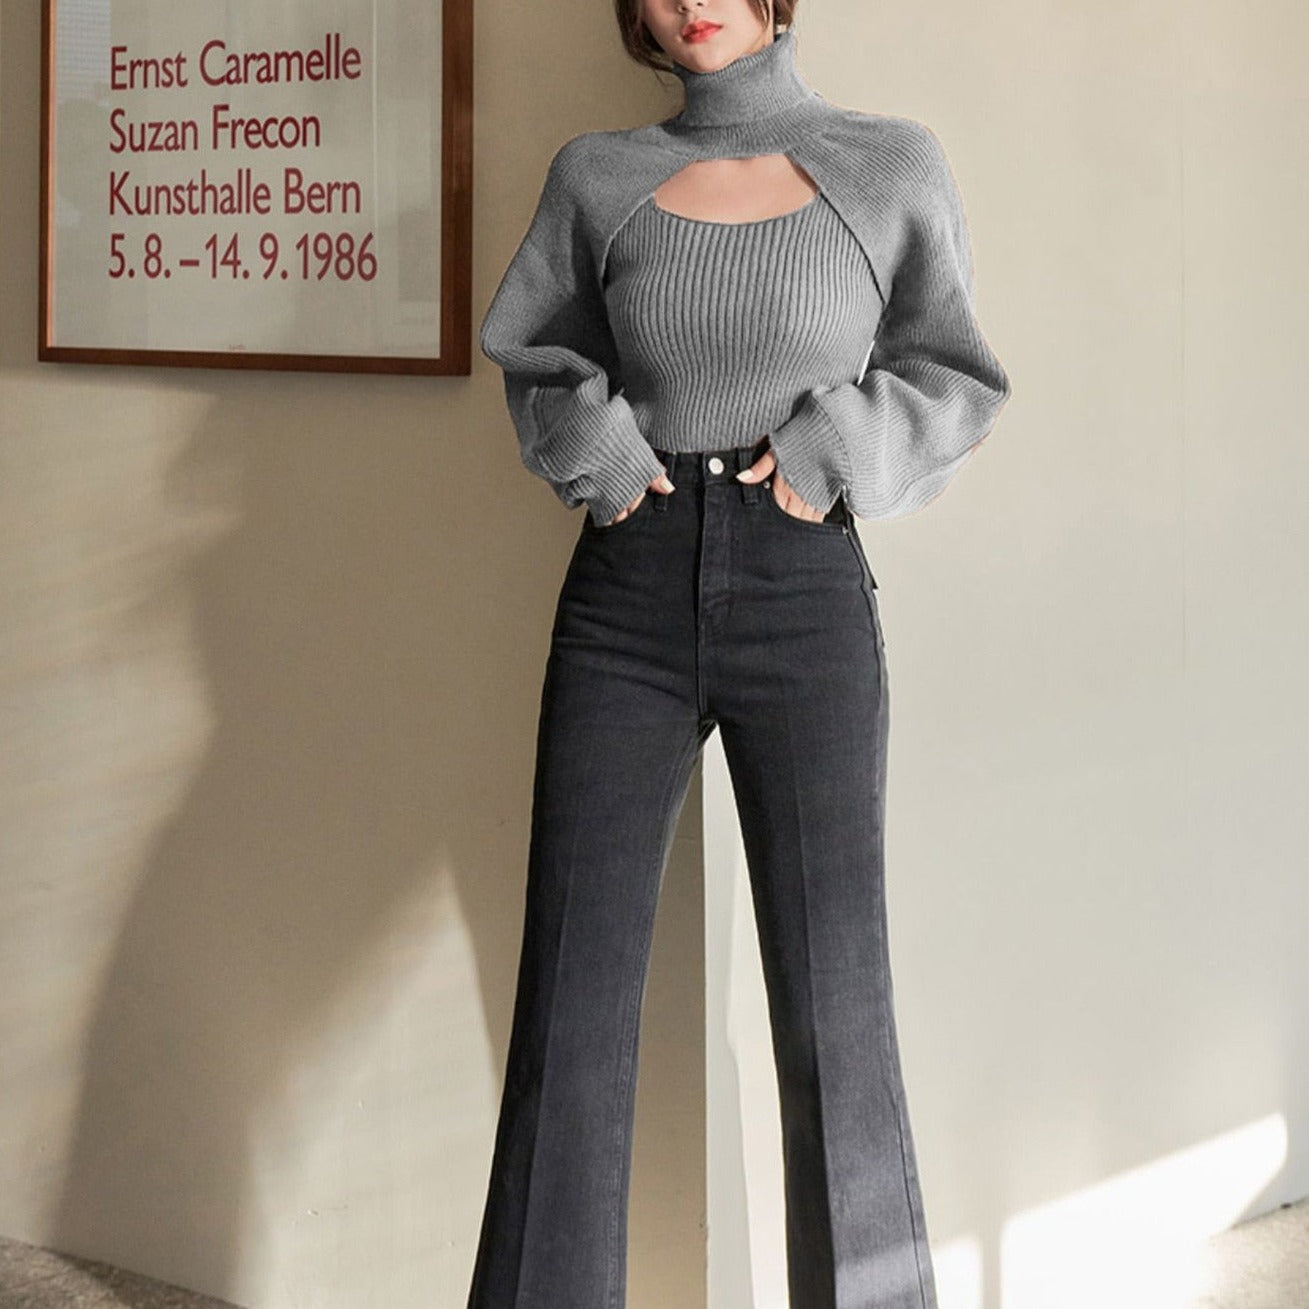 Angelina Turtle Neck Knitted Sweater with Cropped Top